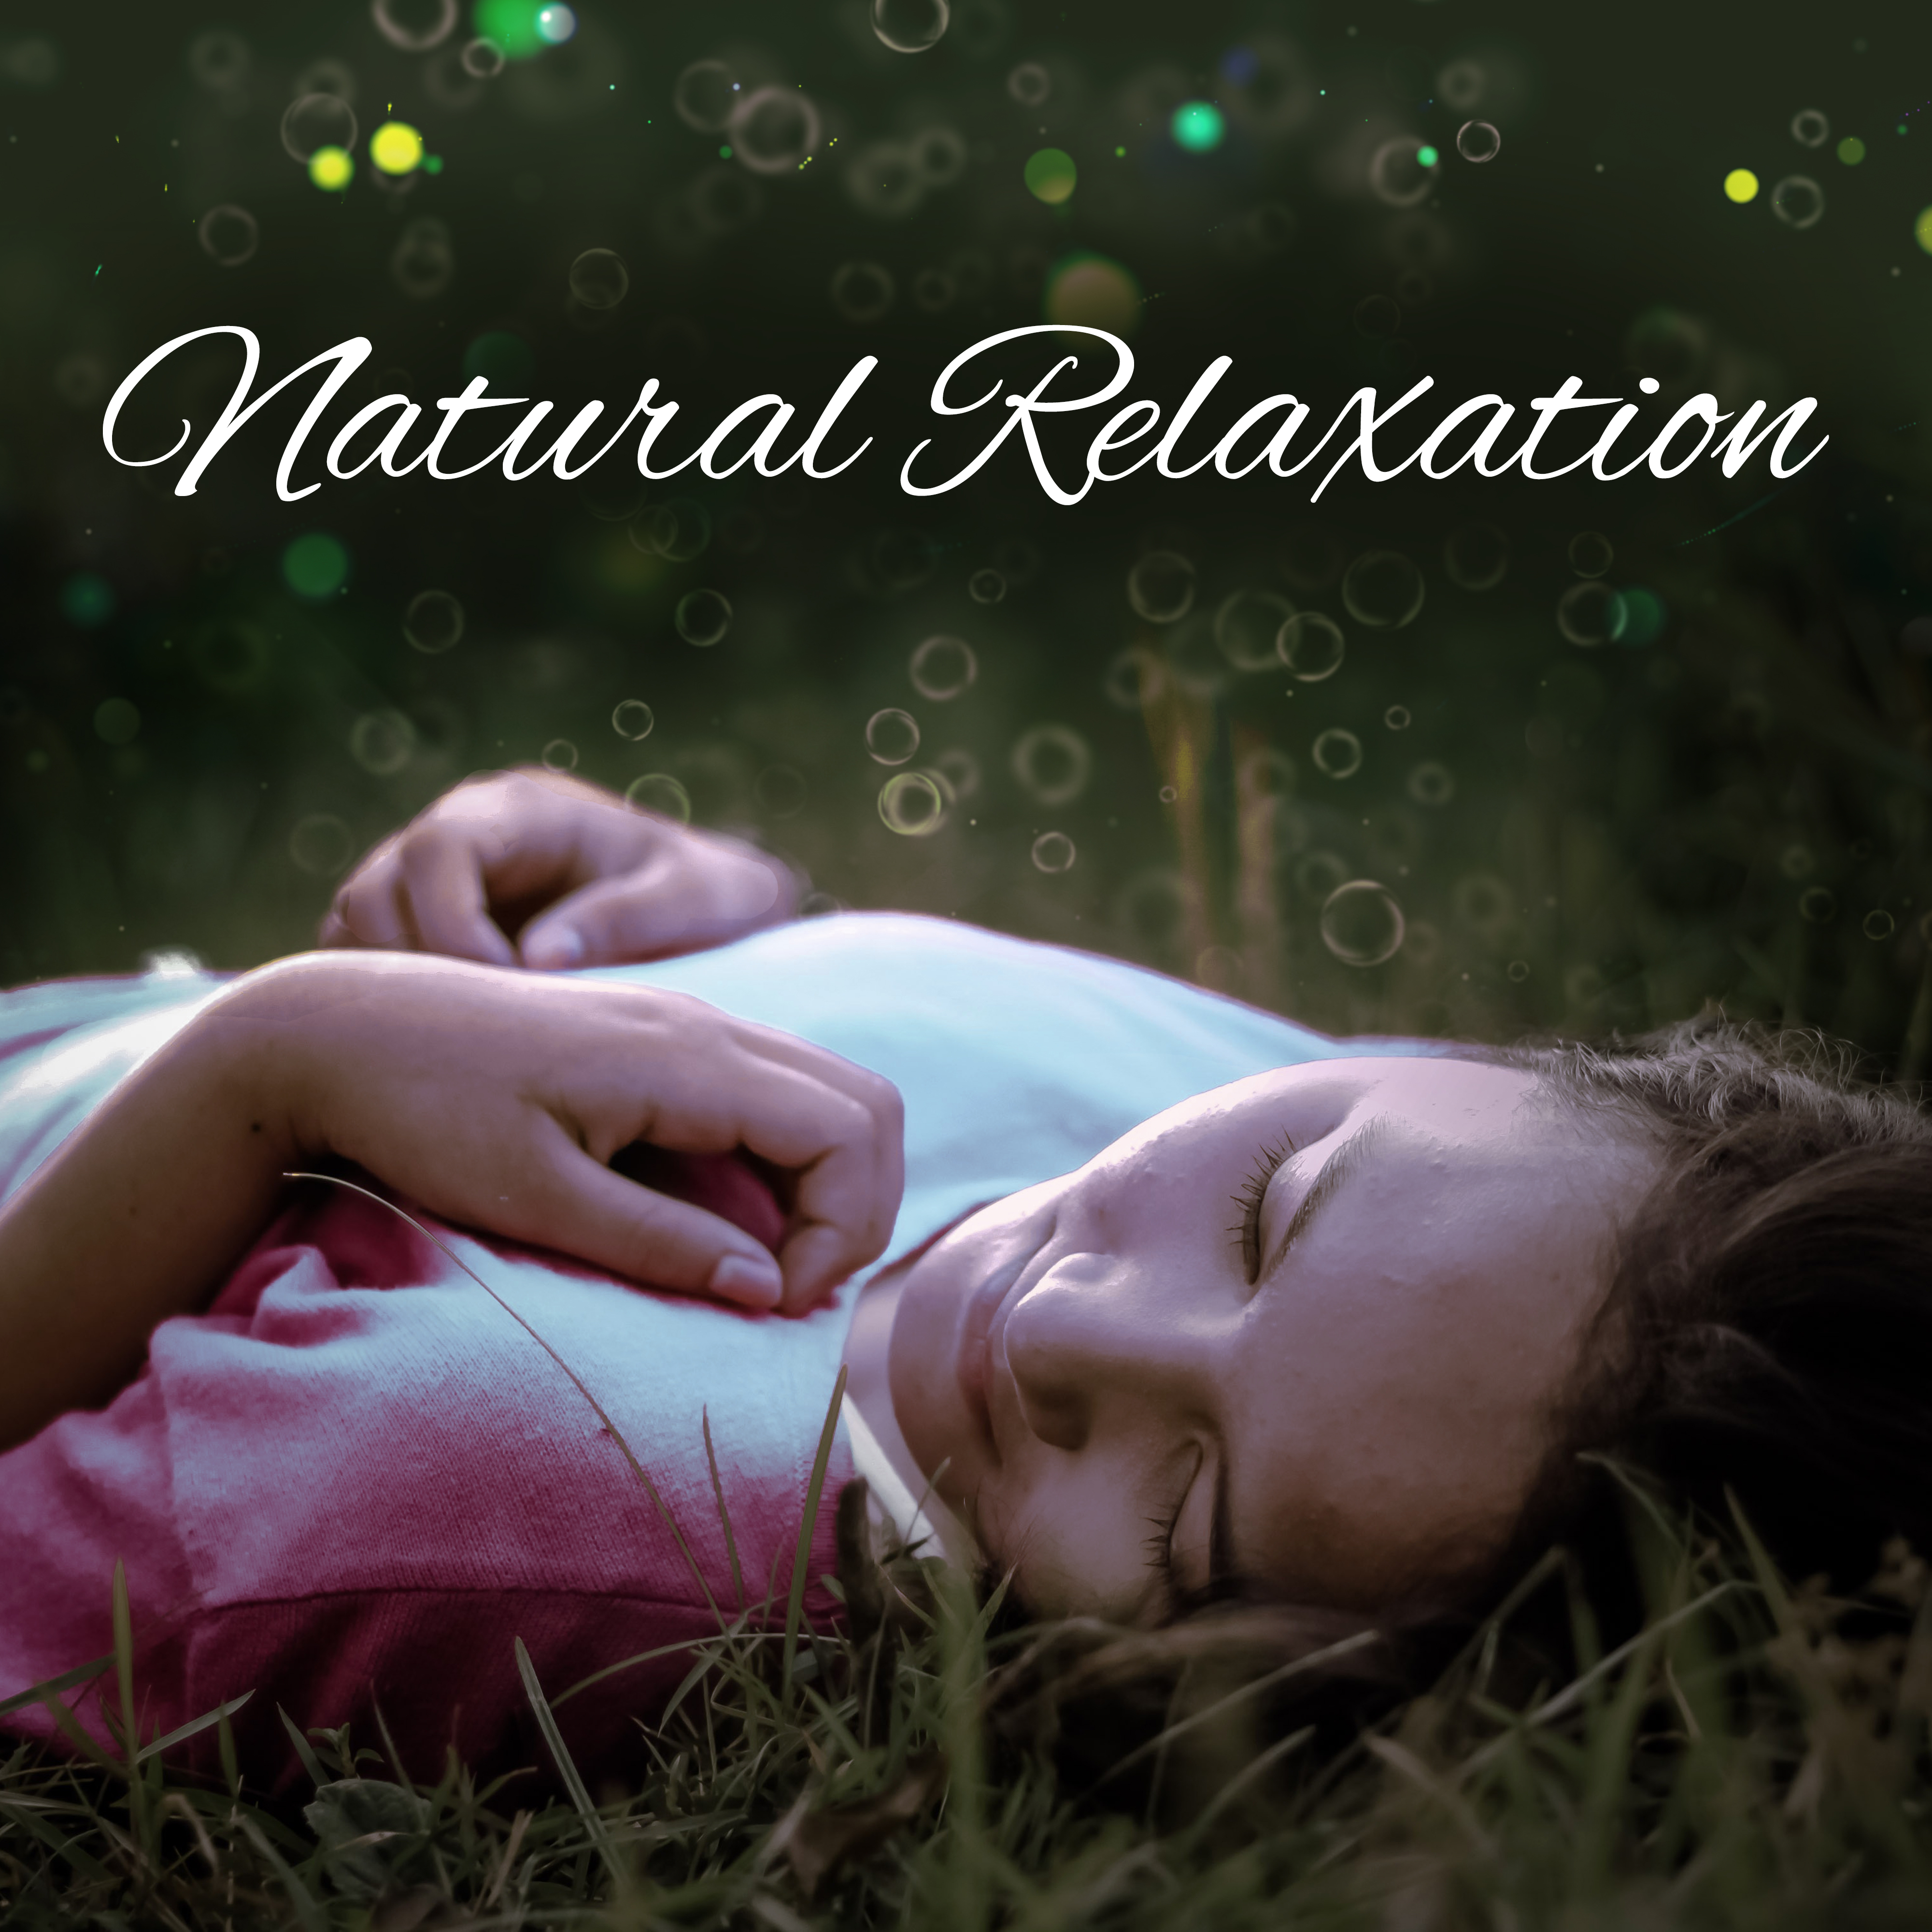 Natural Relaxation  New Age Music, Rest, Relax, Relief Stress, Peaceful Sounds of Nature, Zen